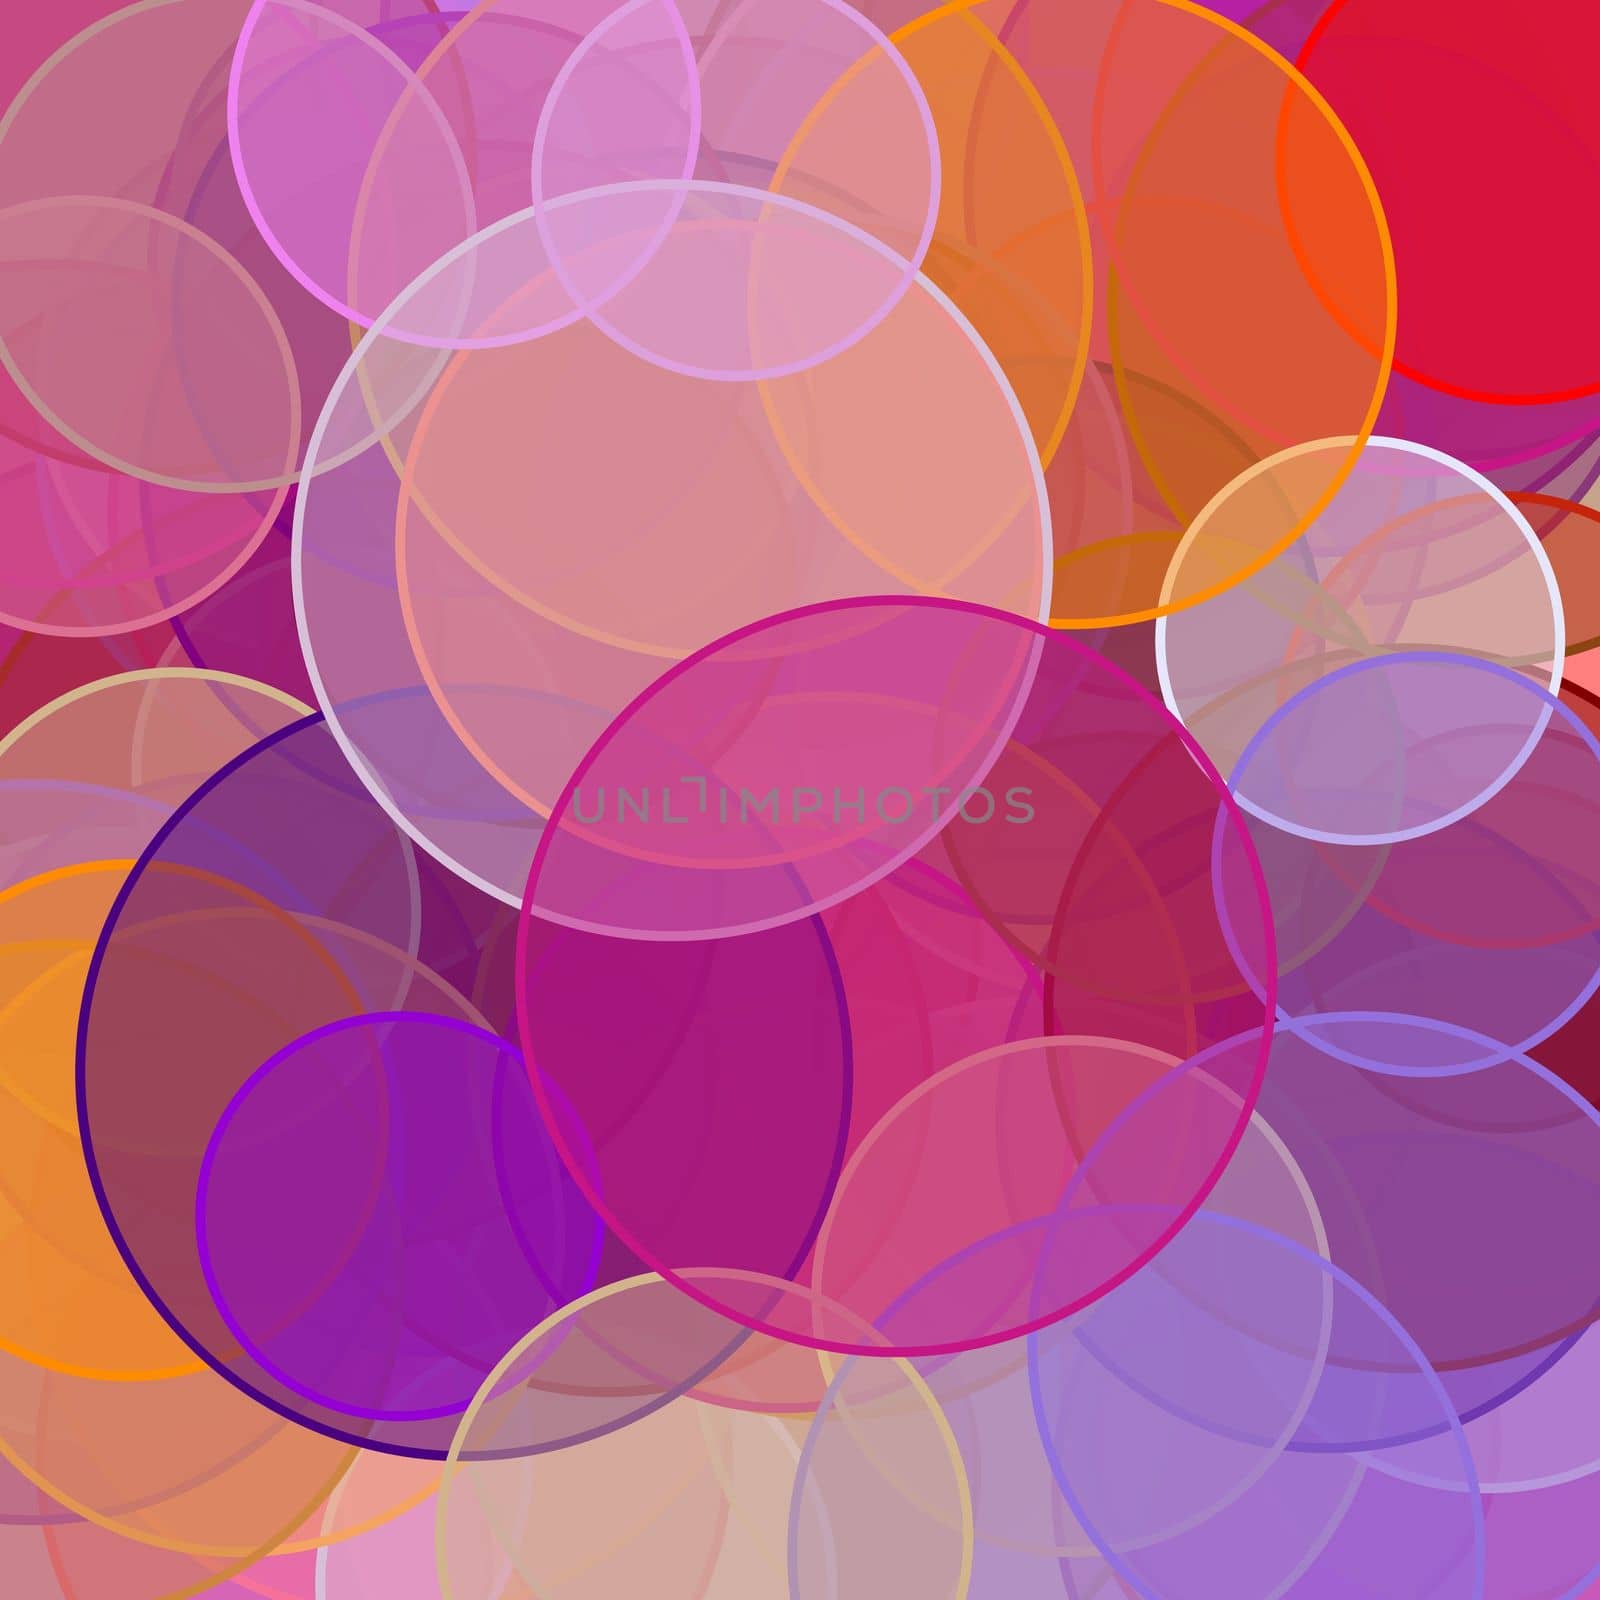 Abstract red orange brown violet circles illustration background by claudiodivizia